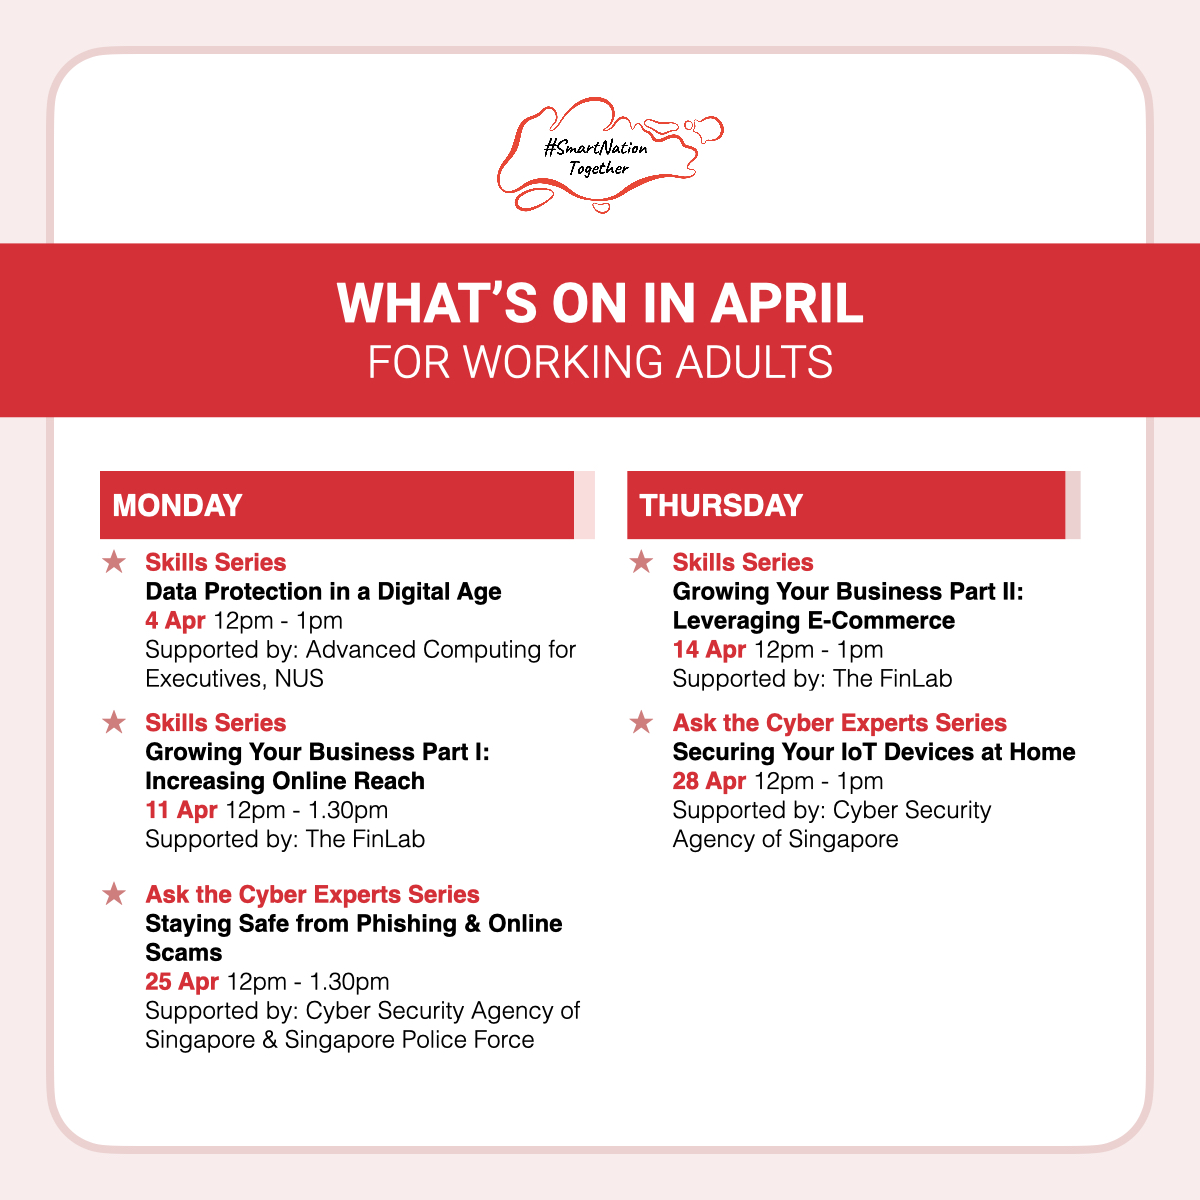 Free webinars in April for working adults